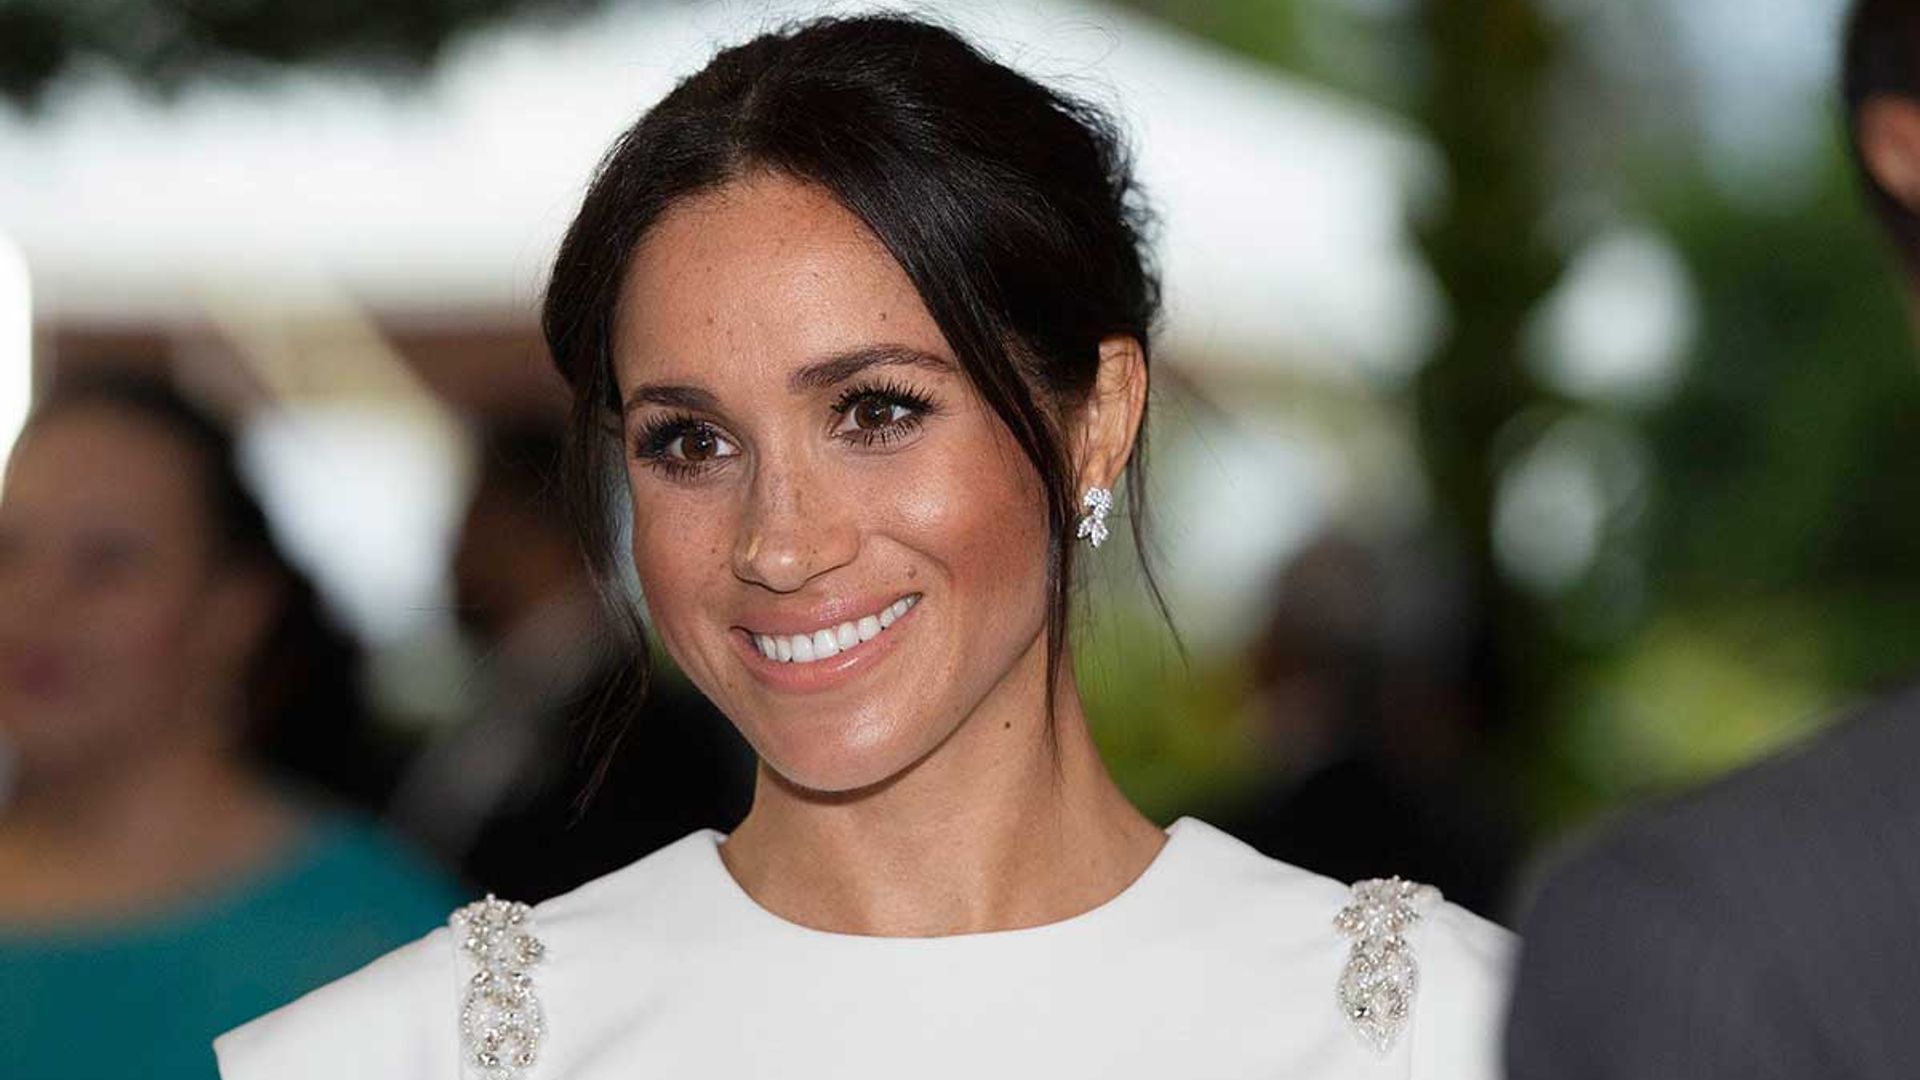 Meghan Markle will not attend Met Gala 2020 contrary to previous reports